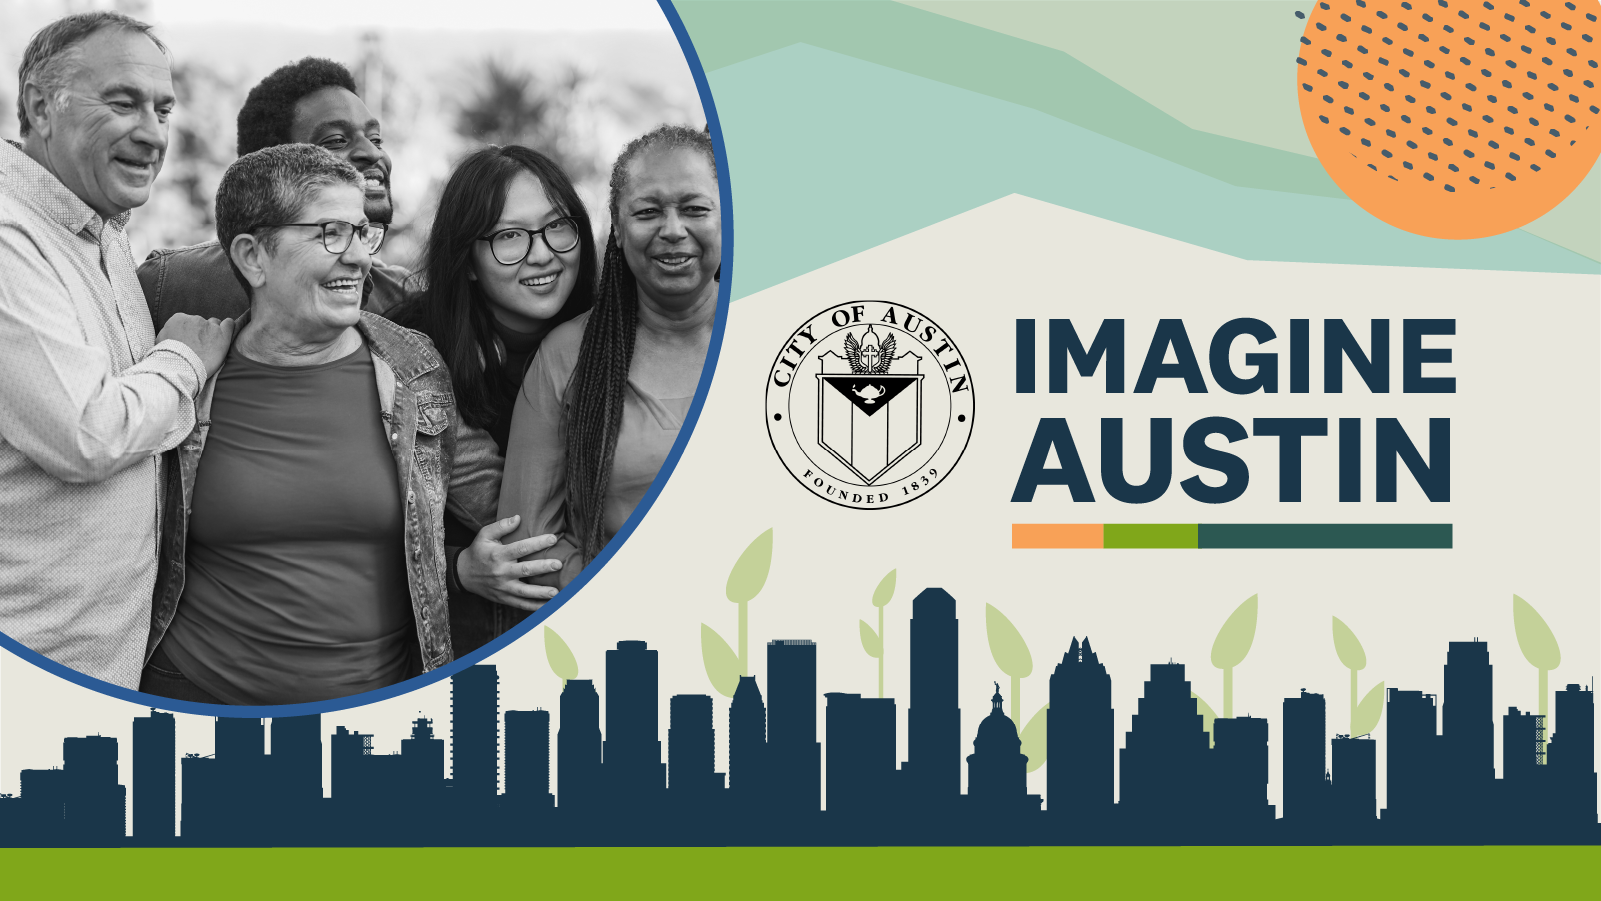 A graphic medley consisting of a photograph of standing people, an illustration of the Downtown Austin skyline, the City seal, and the words "Imagine Austin"